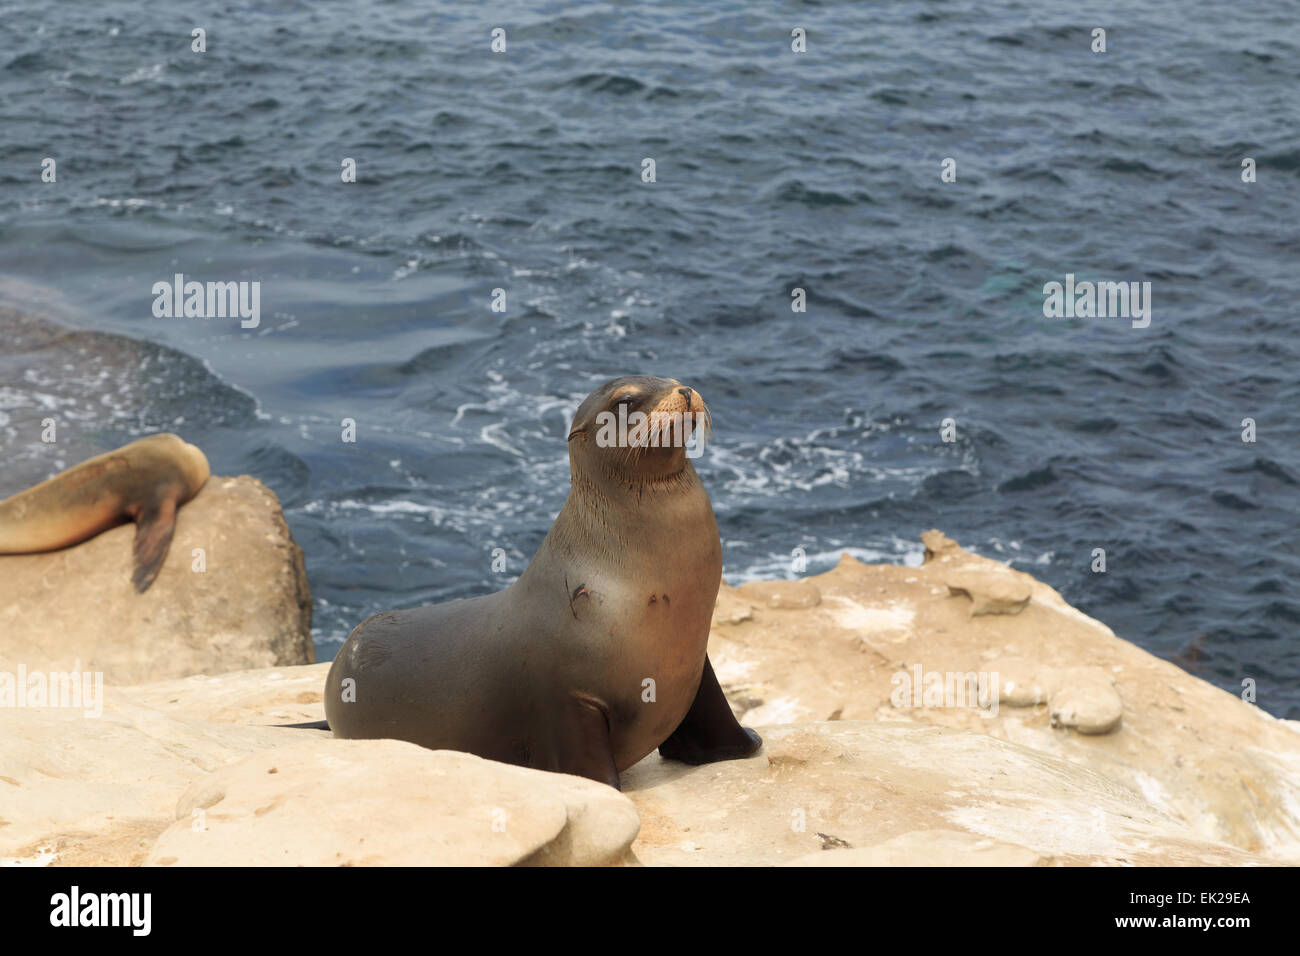 A photograph of some sea lions at La Jolla Cove, San Diego. La Jolla Cove is a small, picturesque cove and beach. Stock Photo